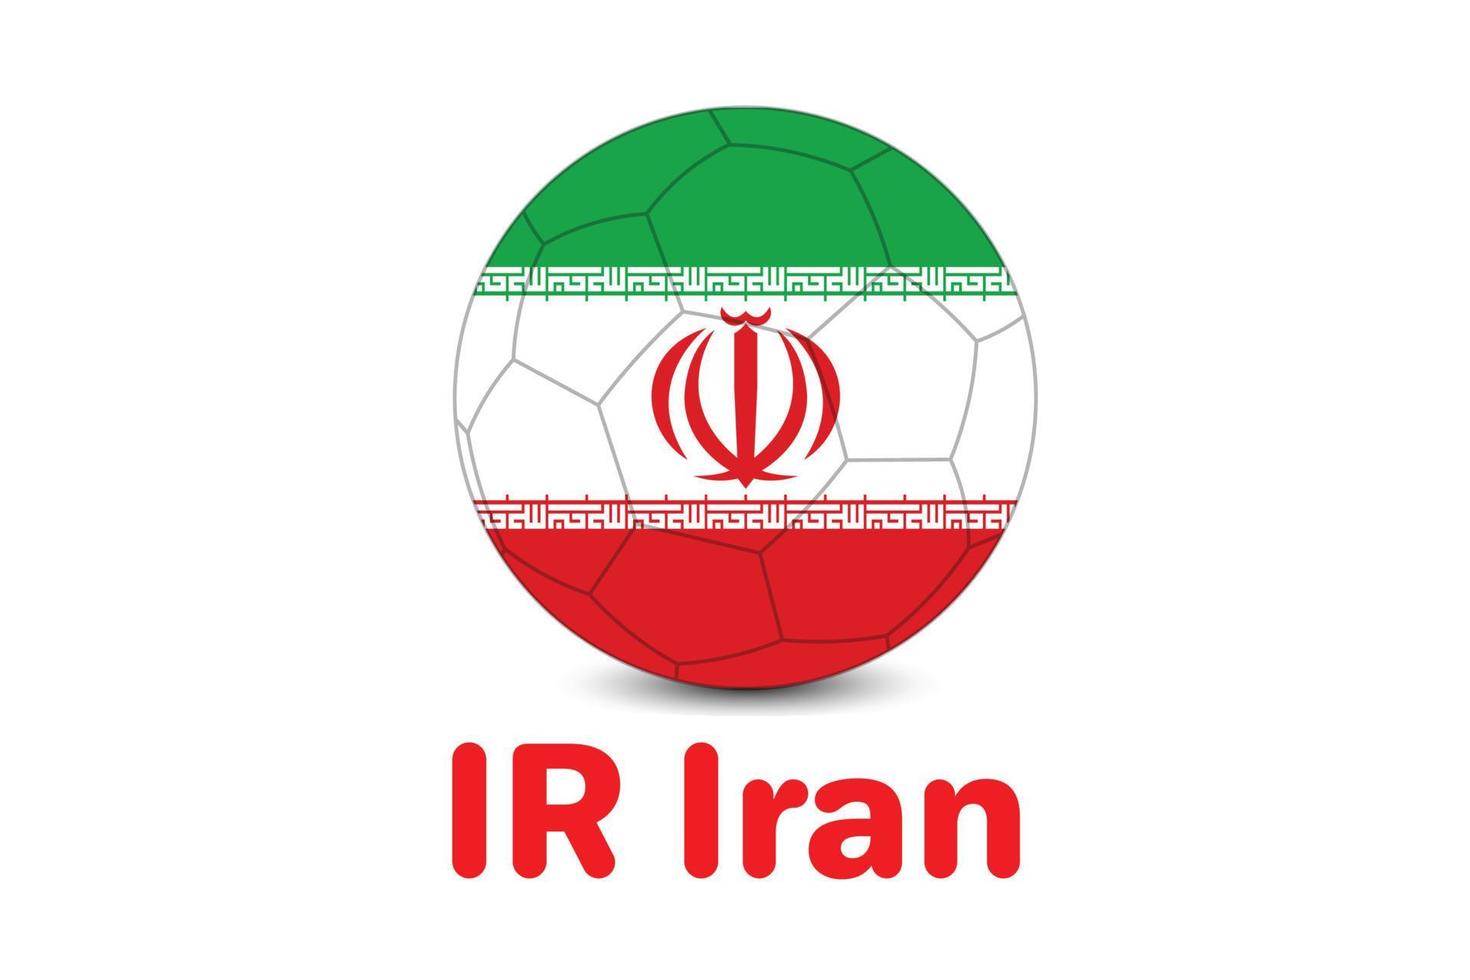 FIFA Worldcup 2022 Iran Flag with football illustration vector